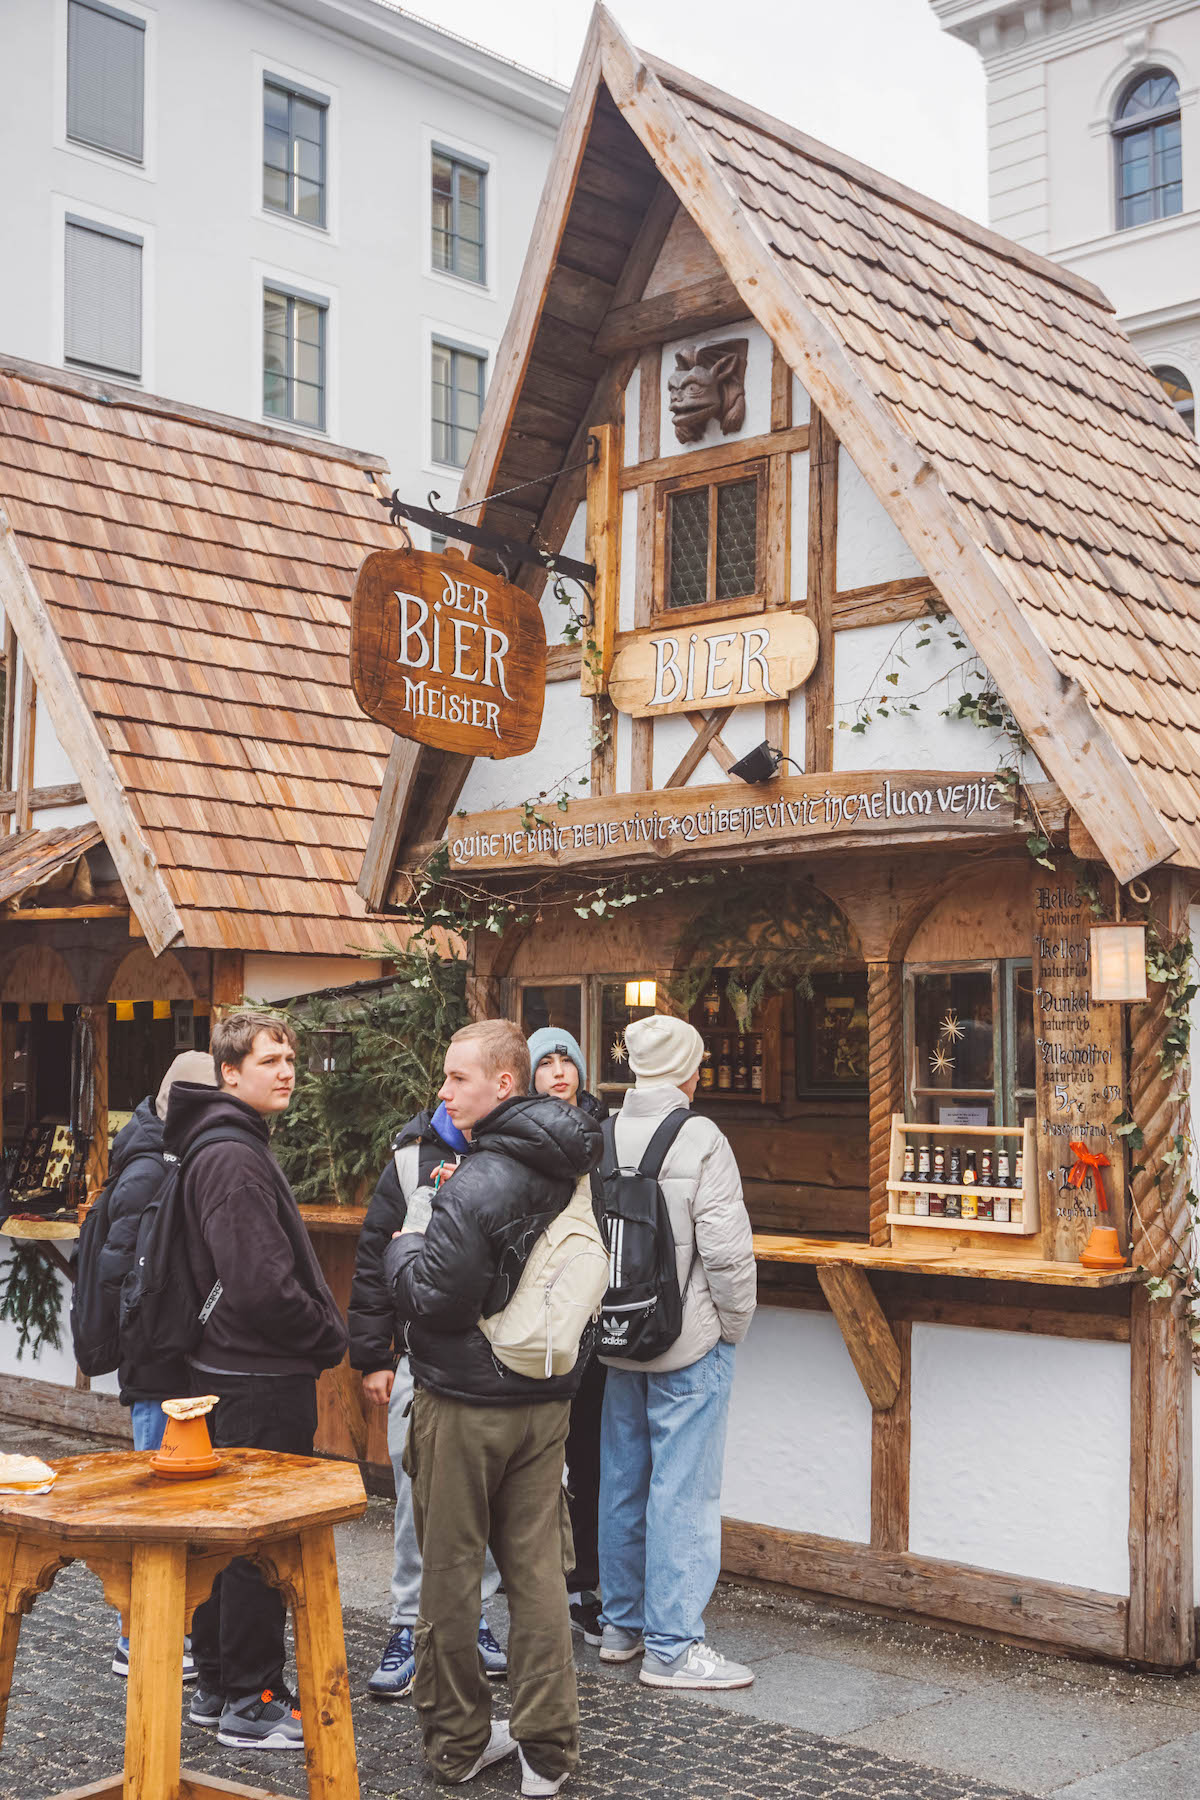 A beer stall at the historic Christmas market in Munich